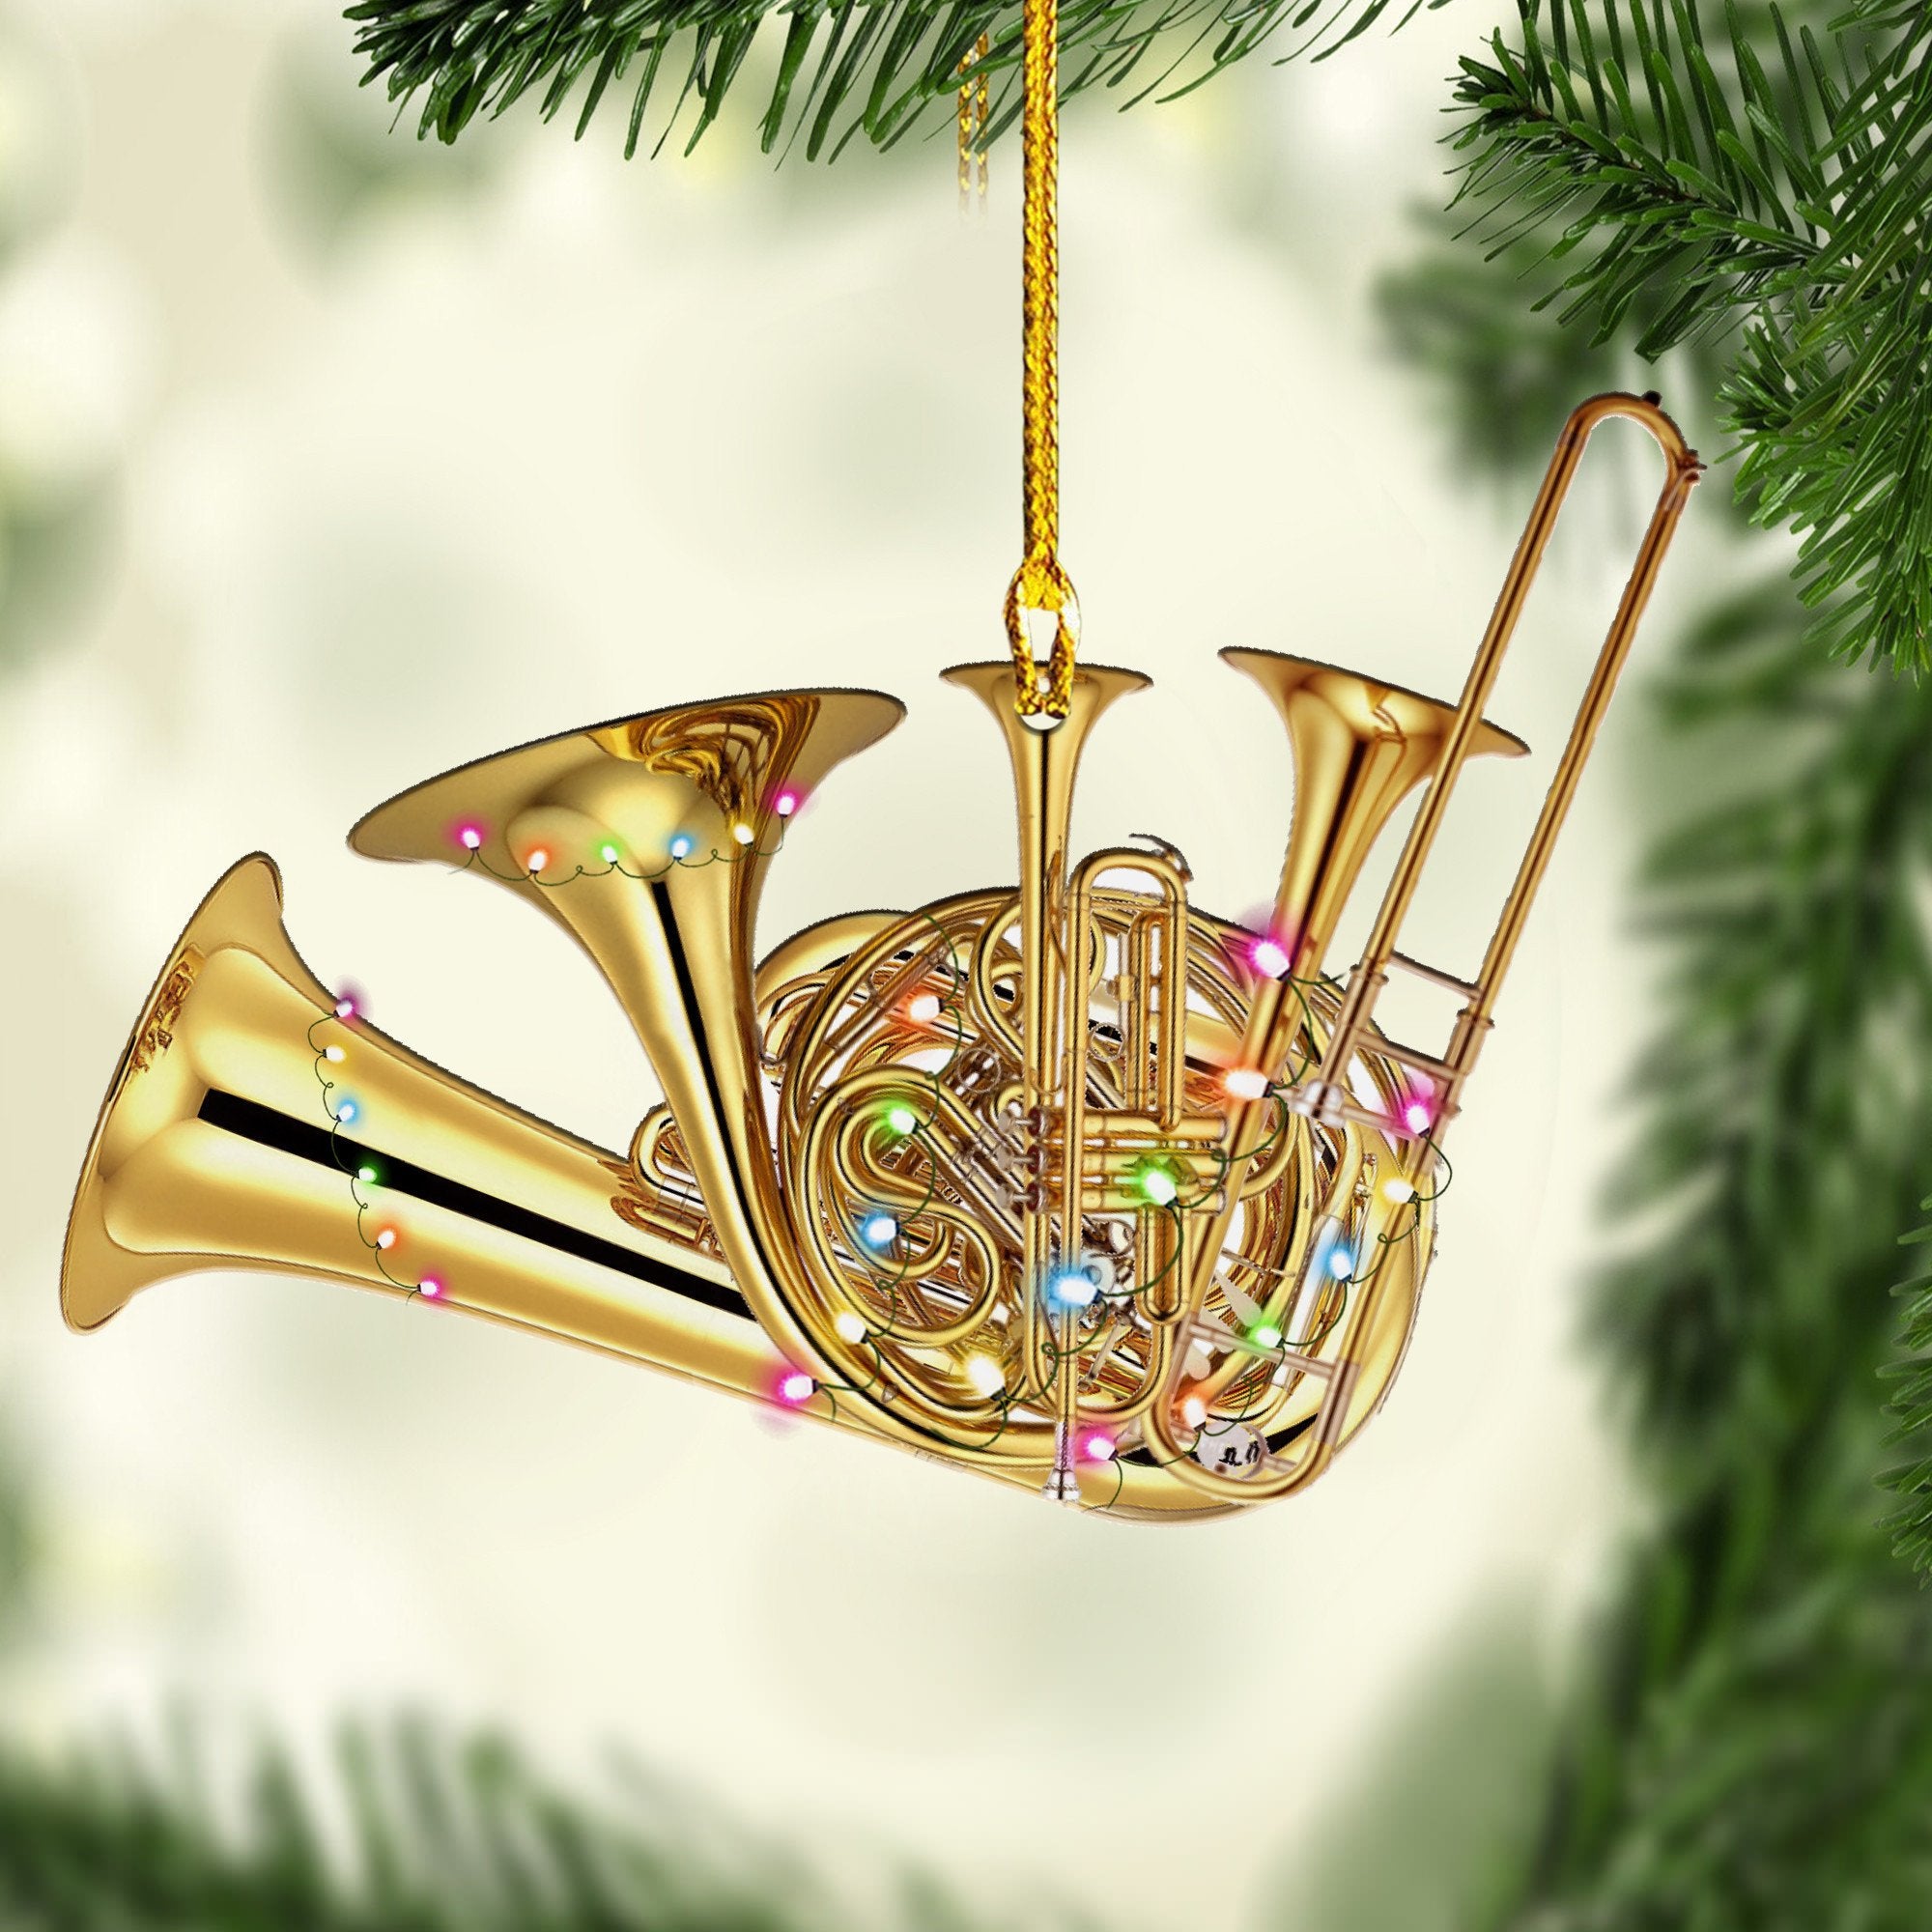 Customized Gold Saxophone Christmas Ornaments/ Saxophone Ornament/ Saxophone Gift